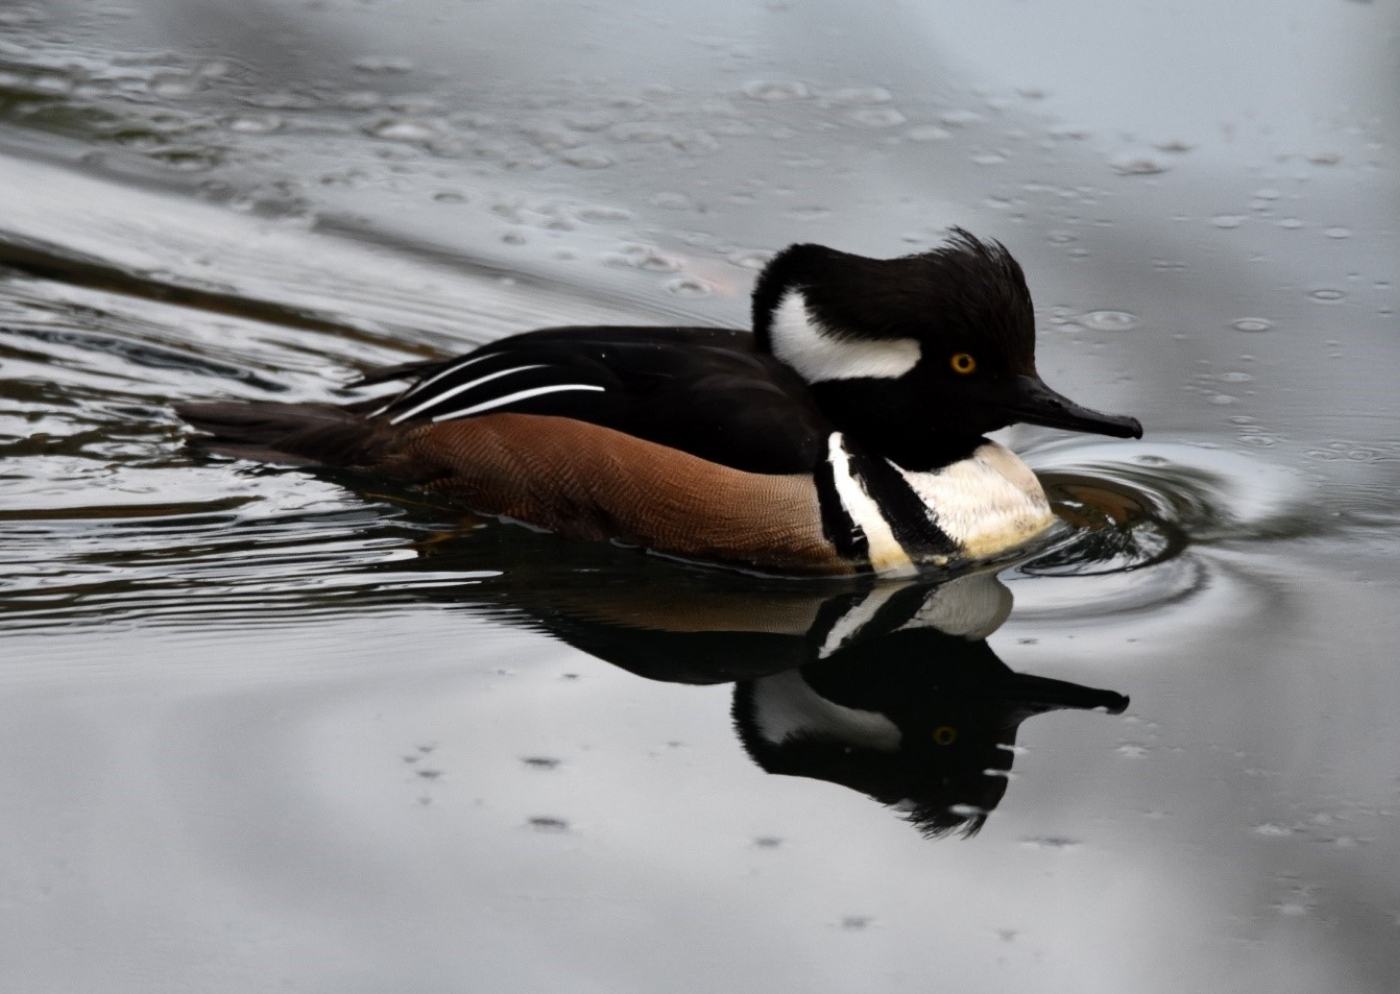 A duck with a black head and beak, white ears, black feathers with white strips, white chest with black strips, and brown belly paddling in the water